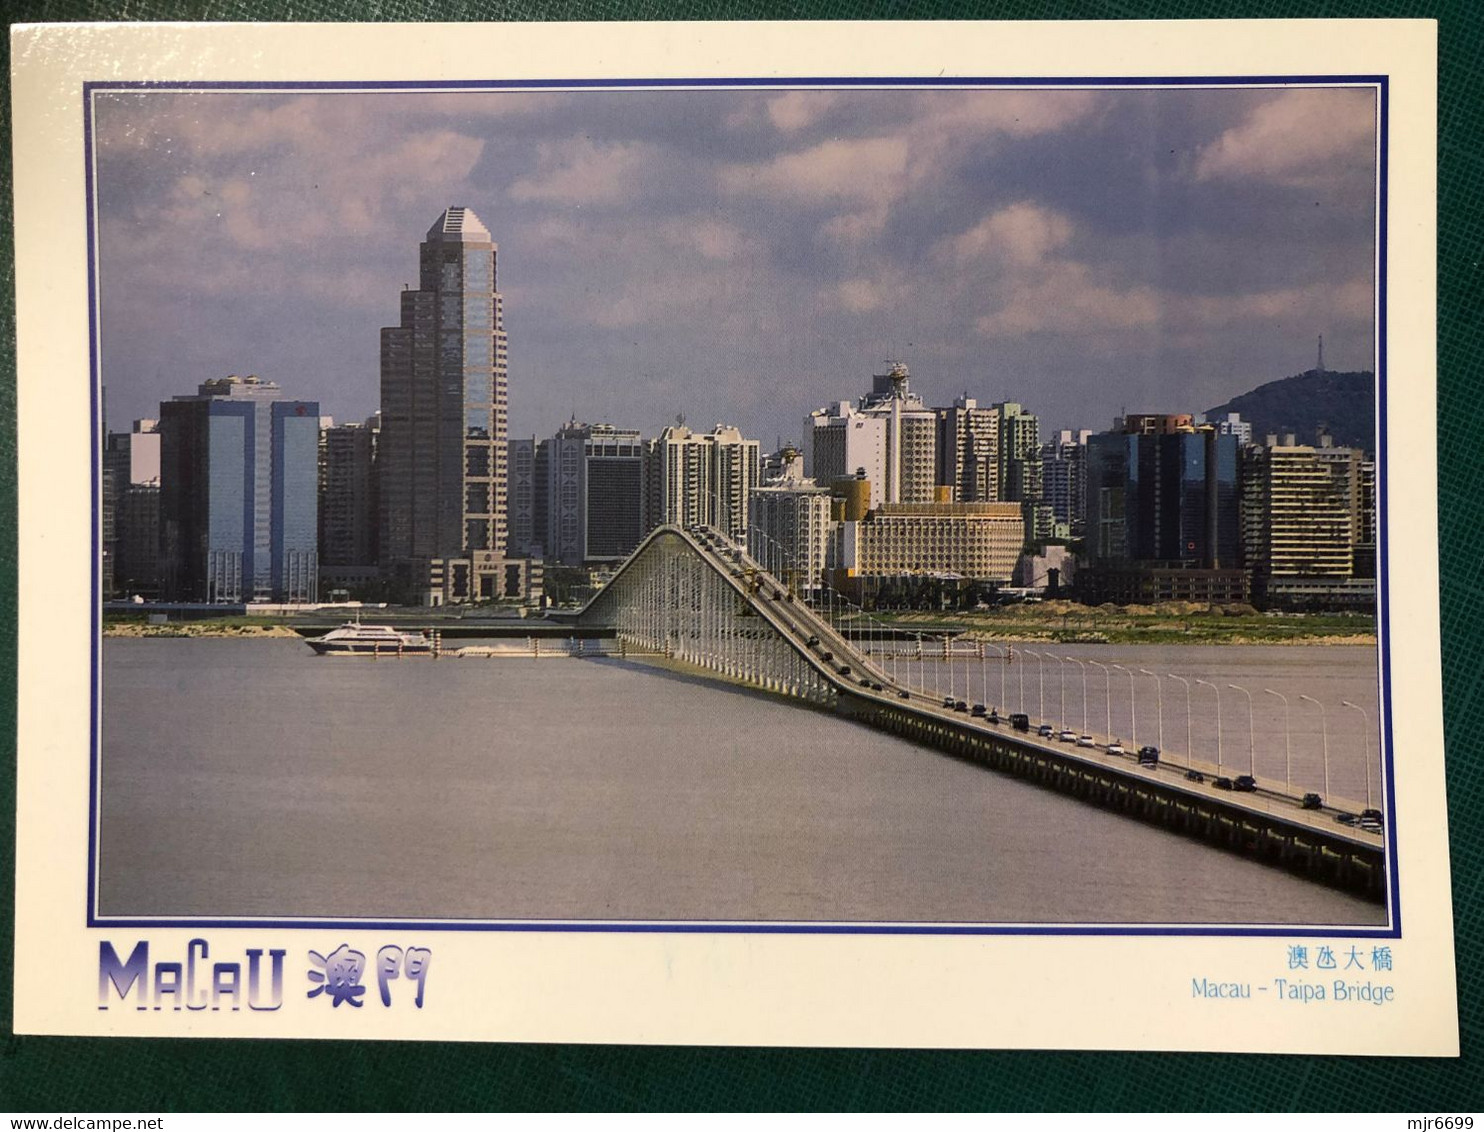 MACAU 1990'S - CASINO LISBOA AND BANK OF CHINA AND BIG BRIDGE AT DAY TIME, PRIVATE PRINTING SIZE 17,8 X 12,7CM. - Macao